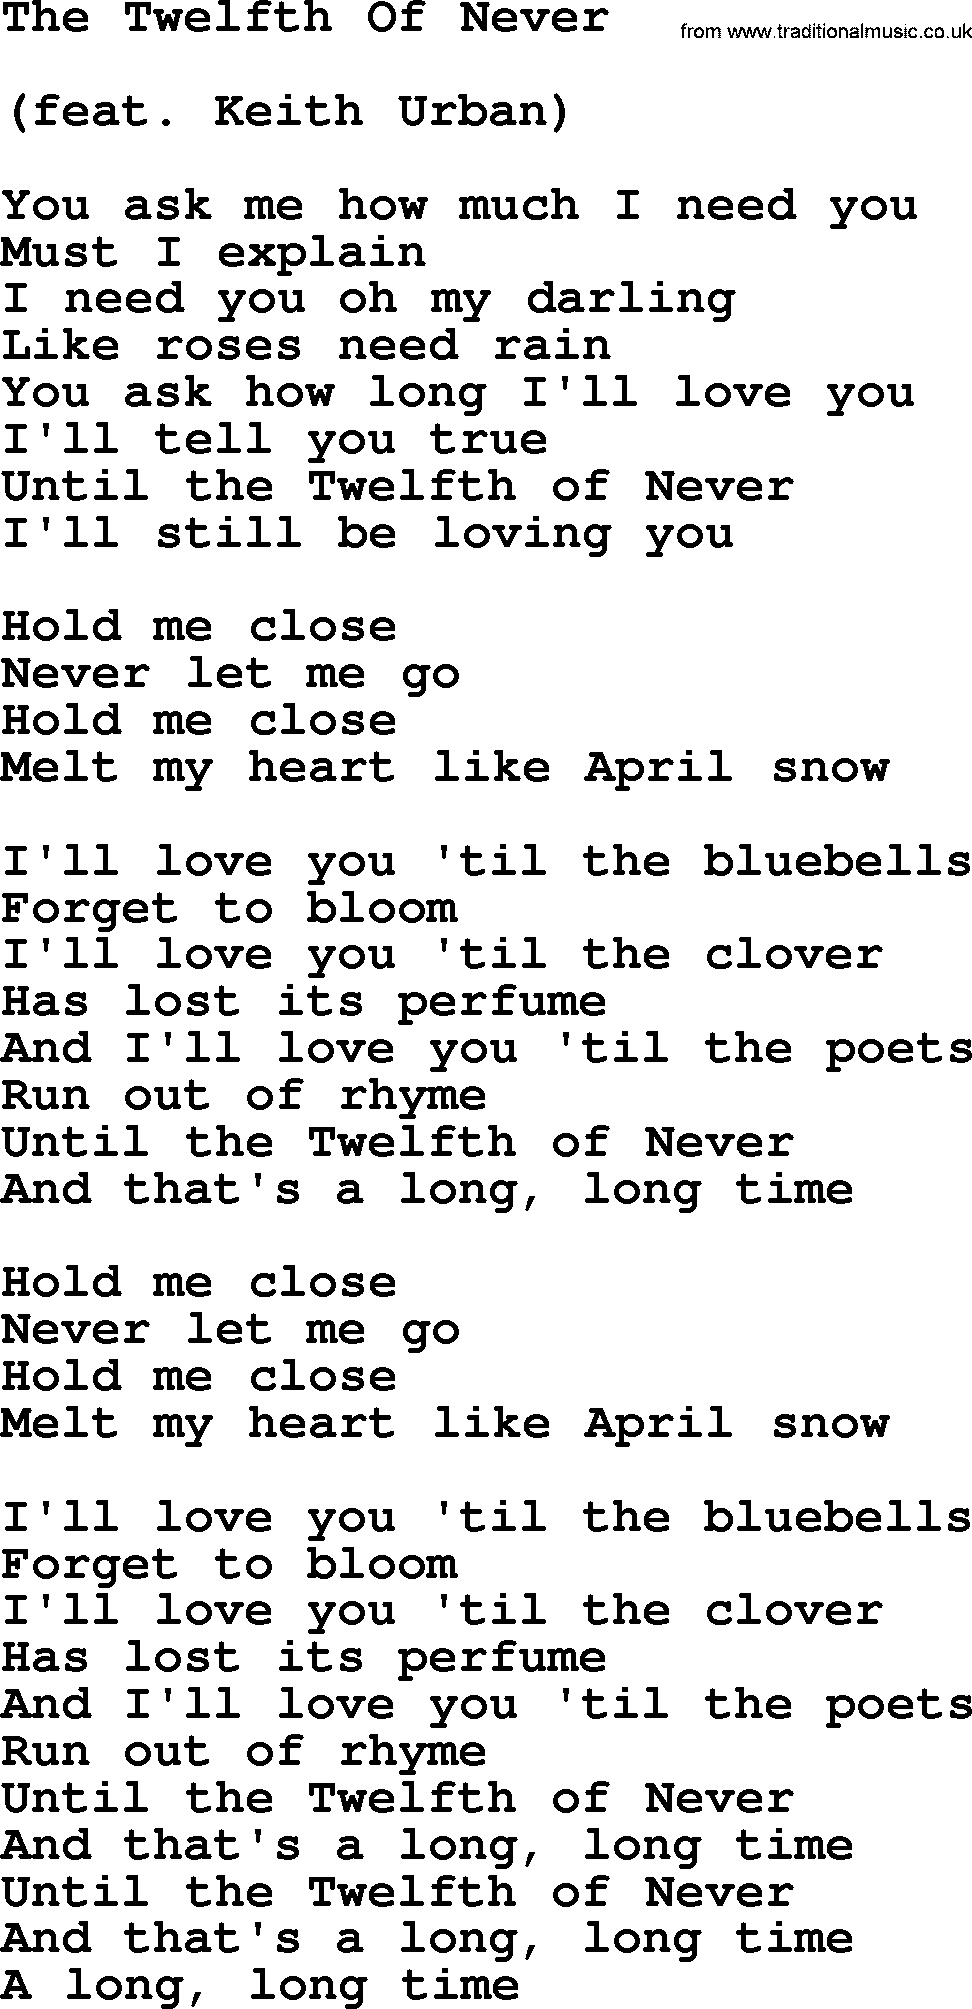 Dolly Parton song The Twelfth Of Never.txt lyrics